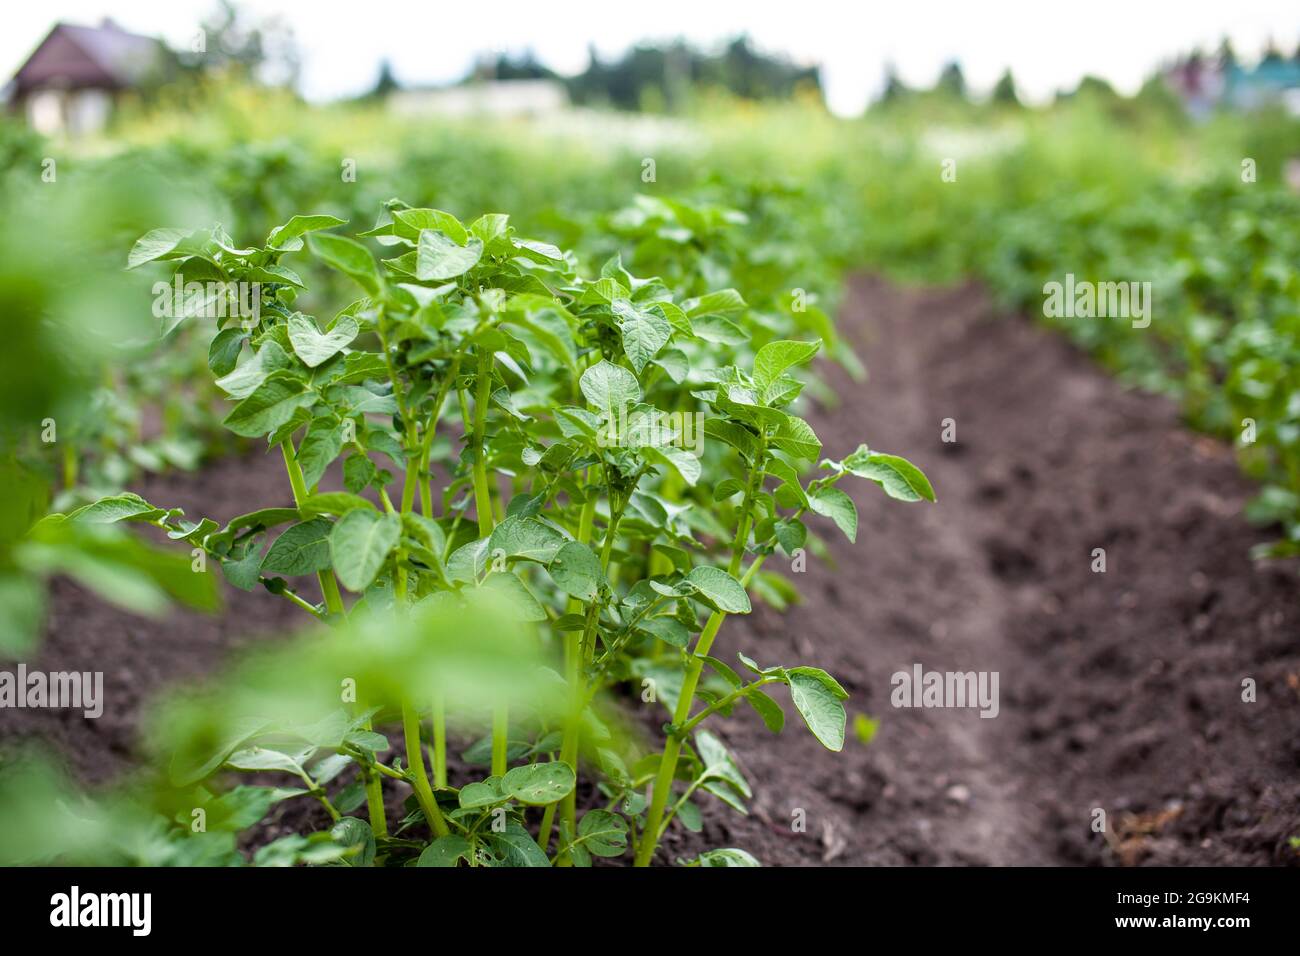 Rows of potatoes in the home garden. Preparation for harvesting. potato plants in rows on a kitchengarden farm springtime with sunshine. Green field o Stock Photo